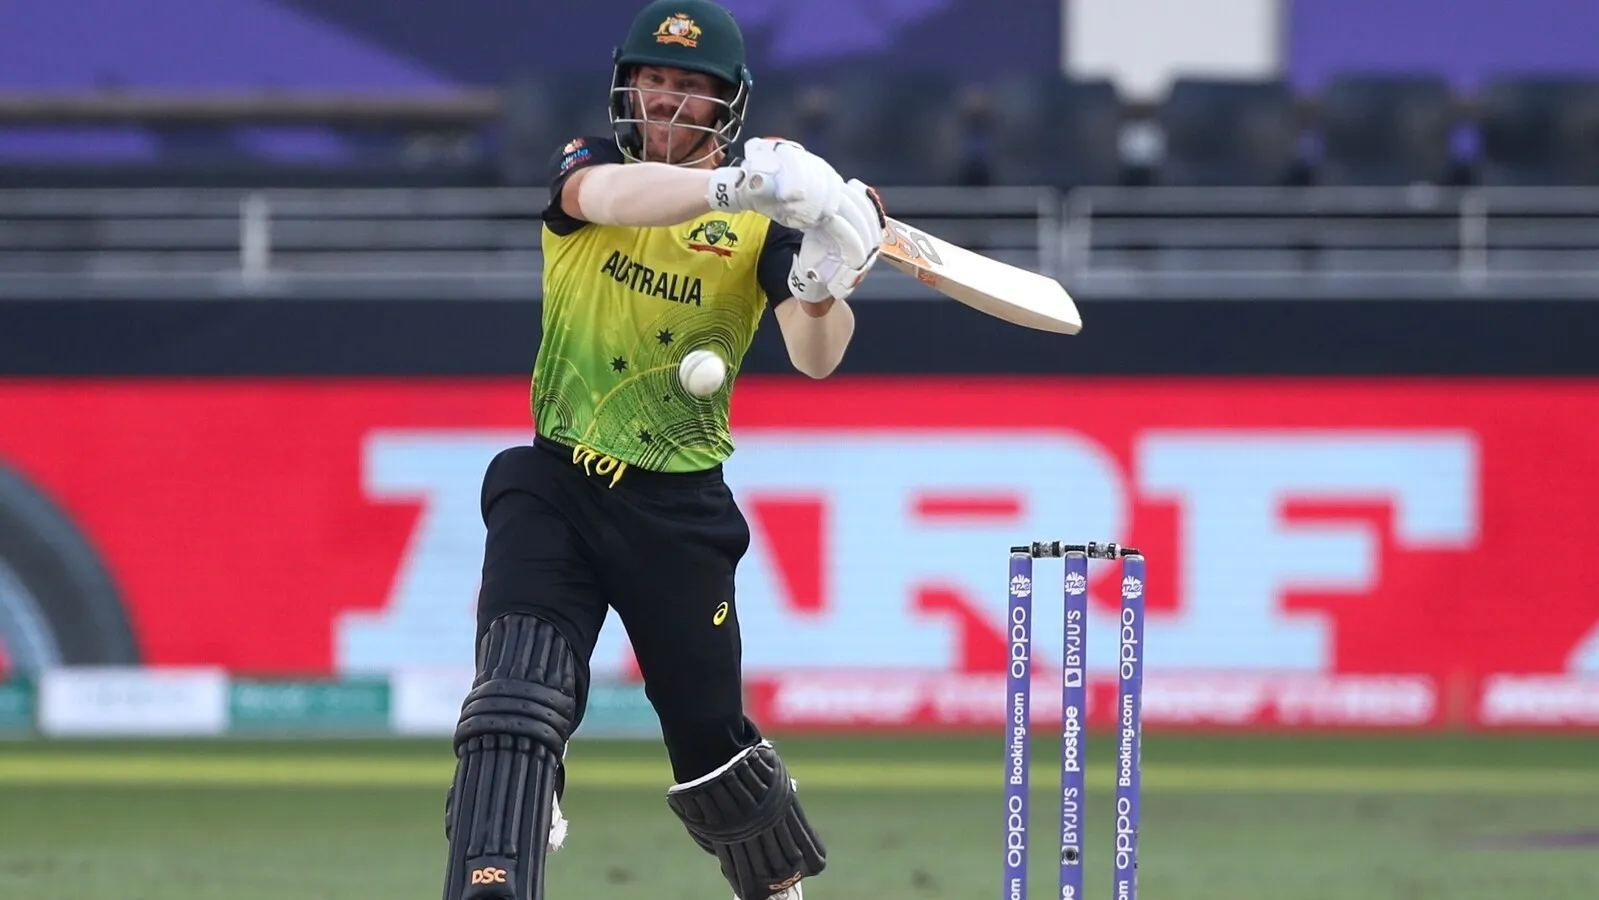 David warner the player of the series of the T20 World Cup 2021 | SportzPoint.com